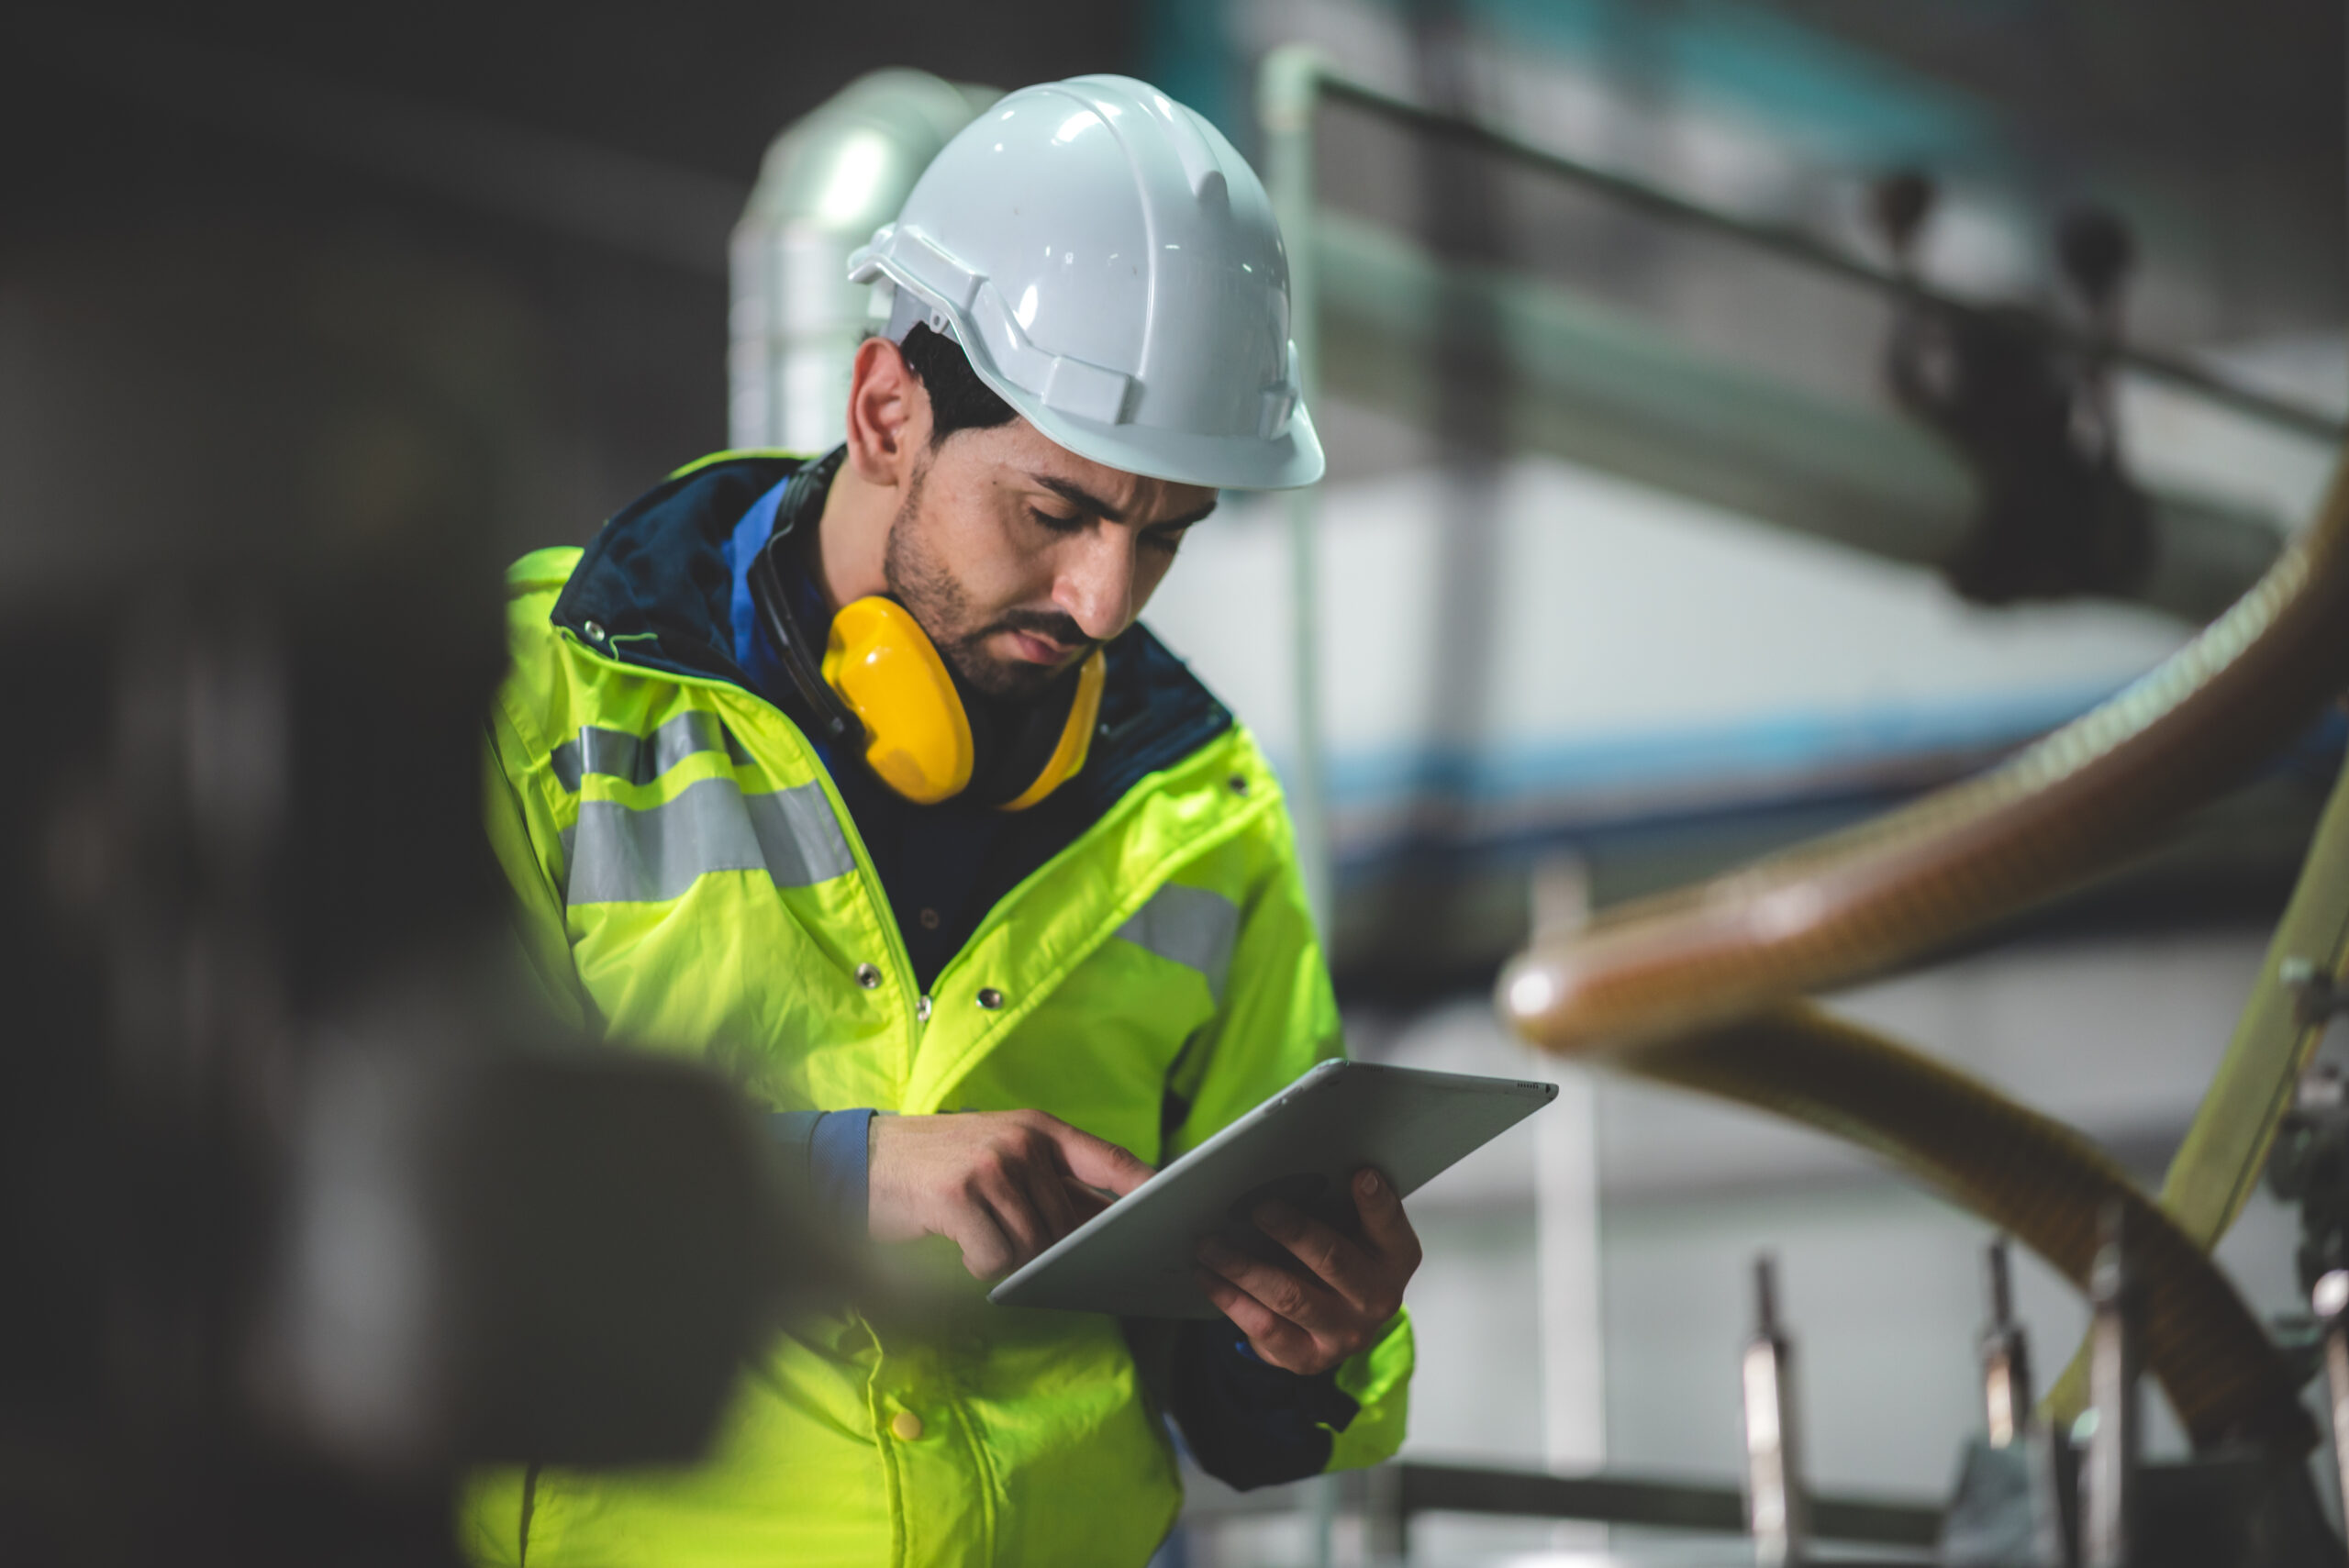 Simplifying Your Equipment Inspections with Software